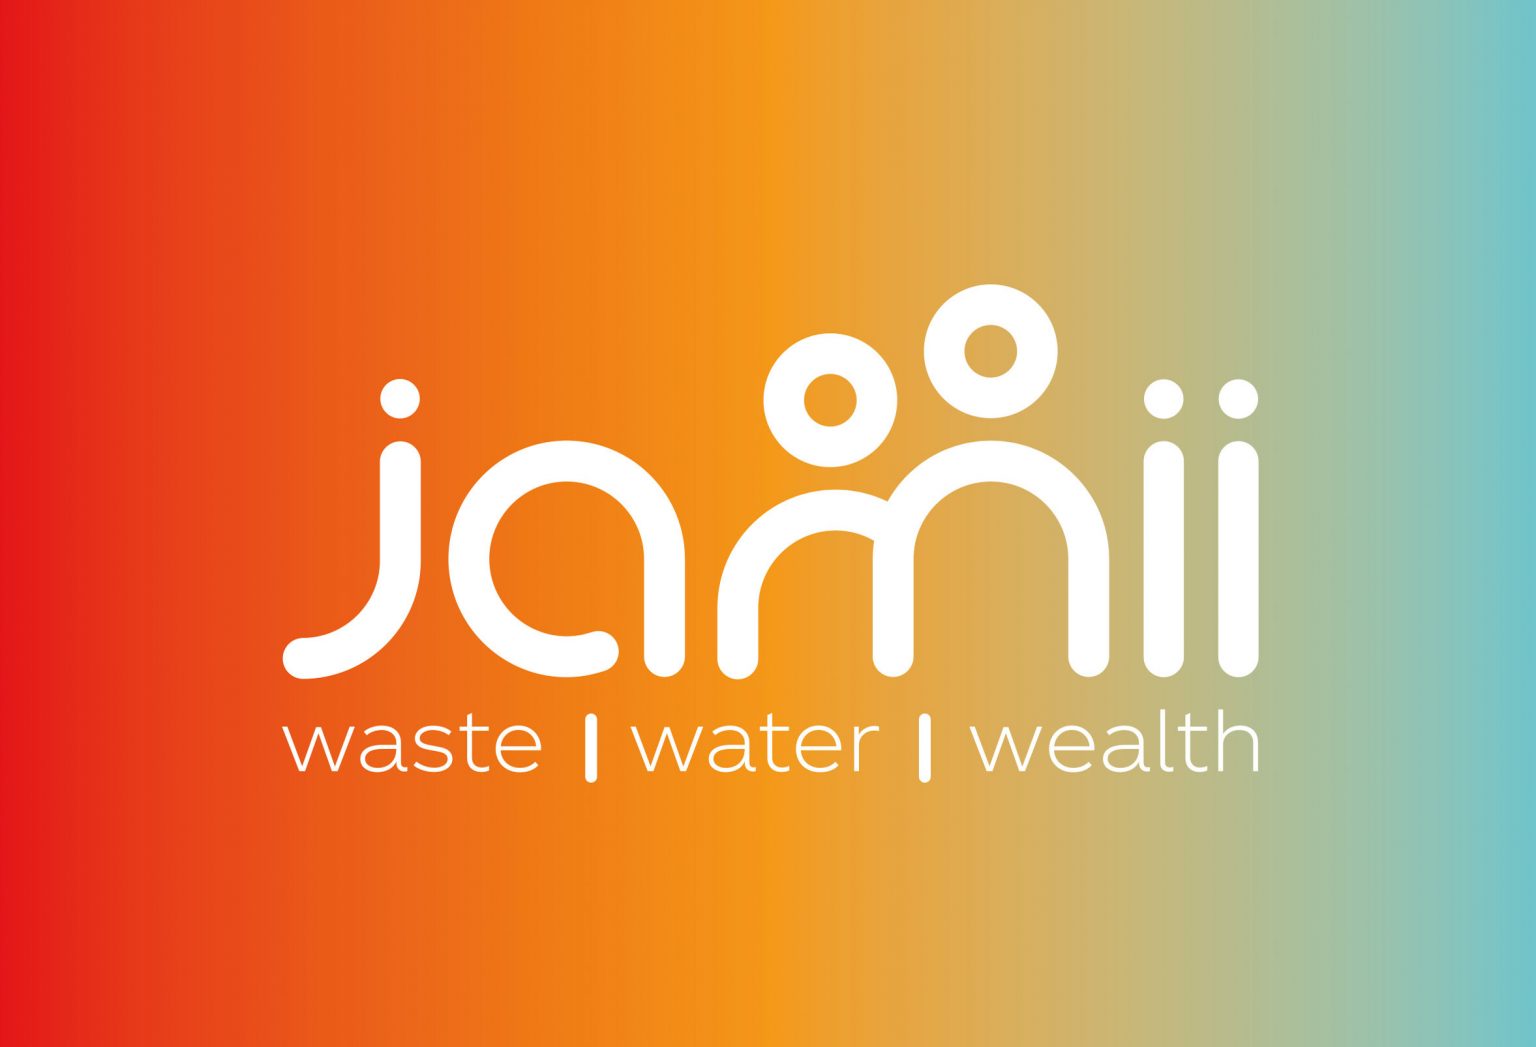 Newly unveiled Coca-Cola Africa platform, JAMII unites resources and partners to achieve more for Africa